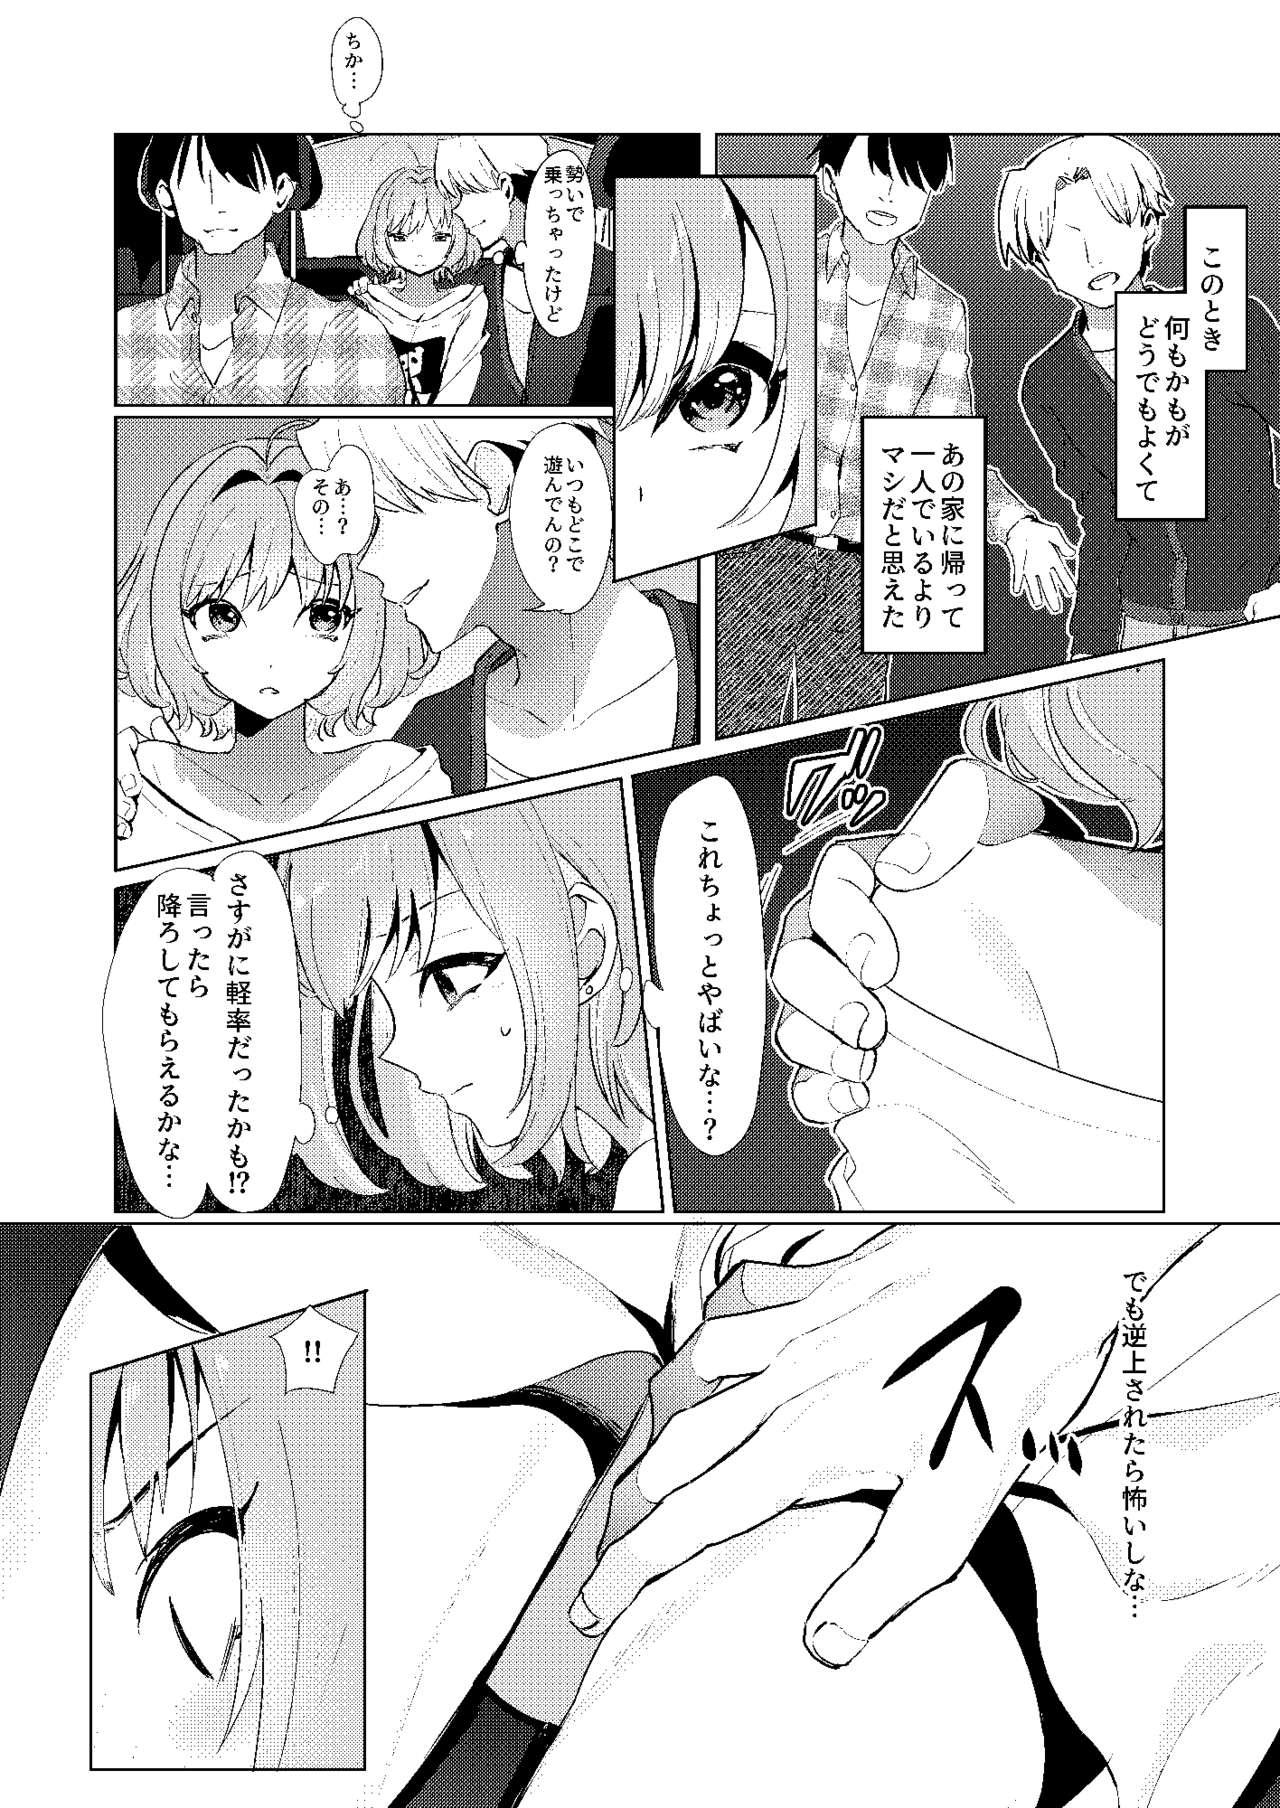 Girlfriends 夢〇りあむの青春 - The idolmaster Harcore - Page 11